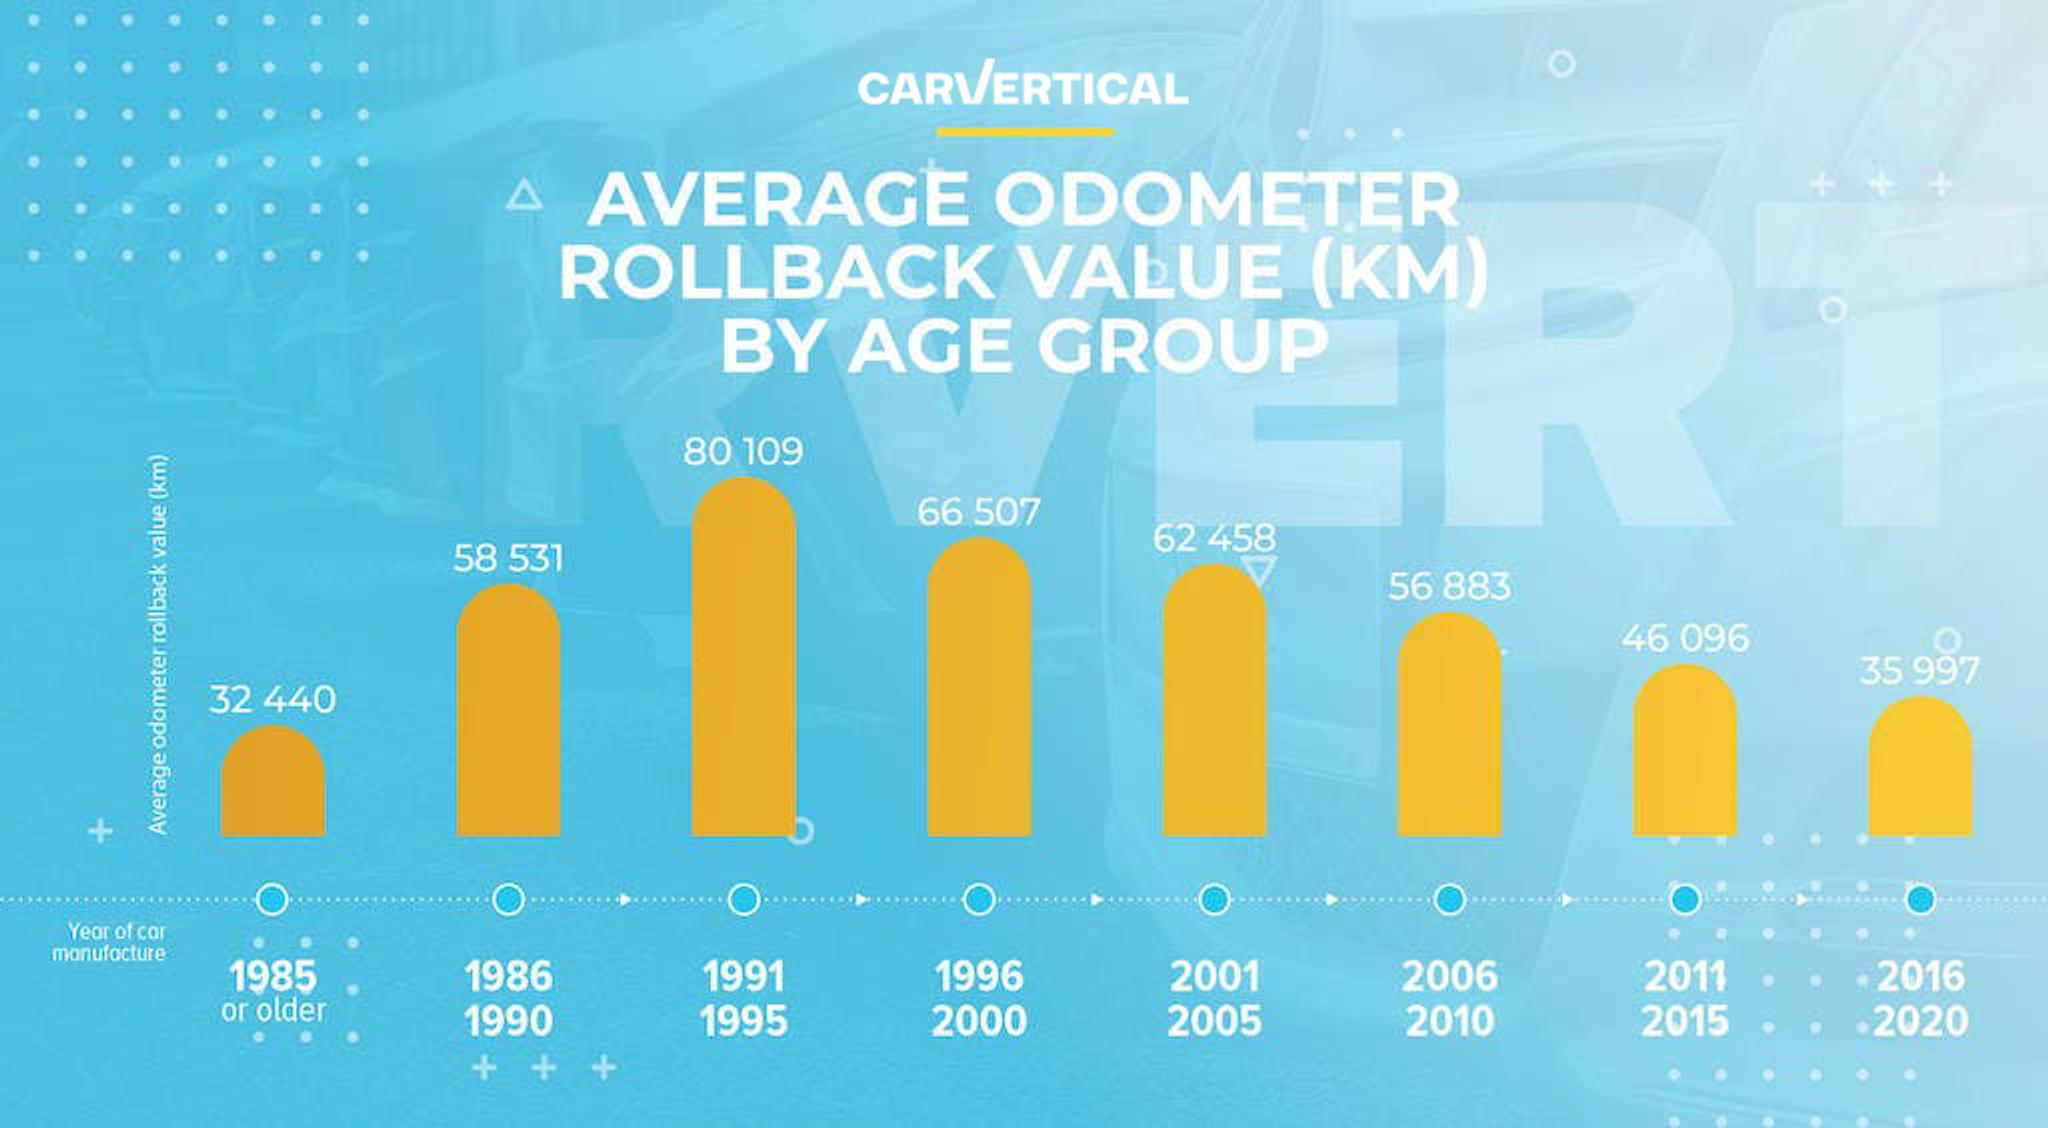 Average odometer rollback value by age group